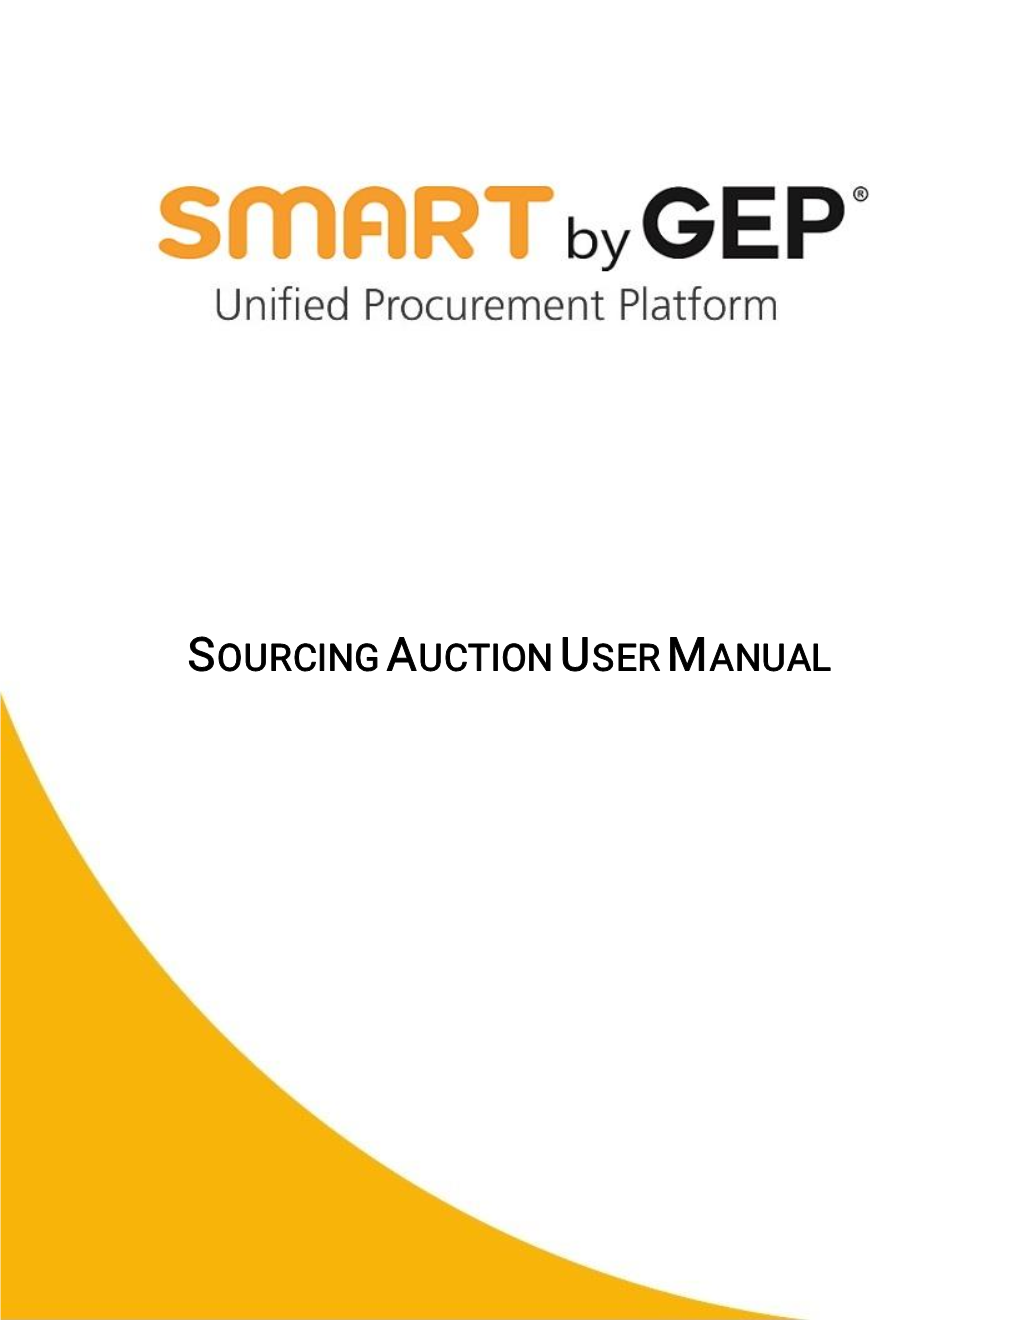 Sourcing Auction User Manual